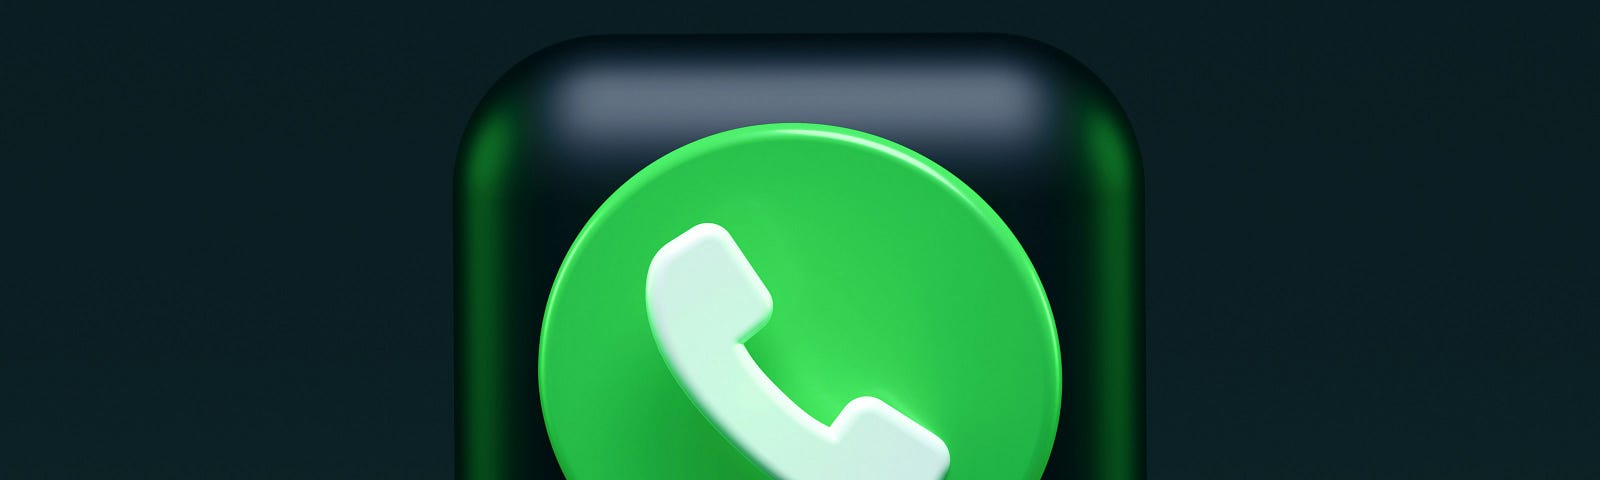 There’s a 3D Whatsapp icon against a 3D black brick with black background.